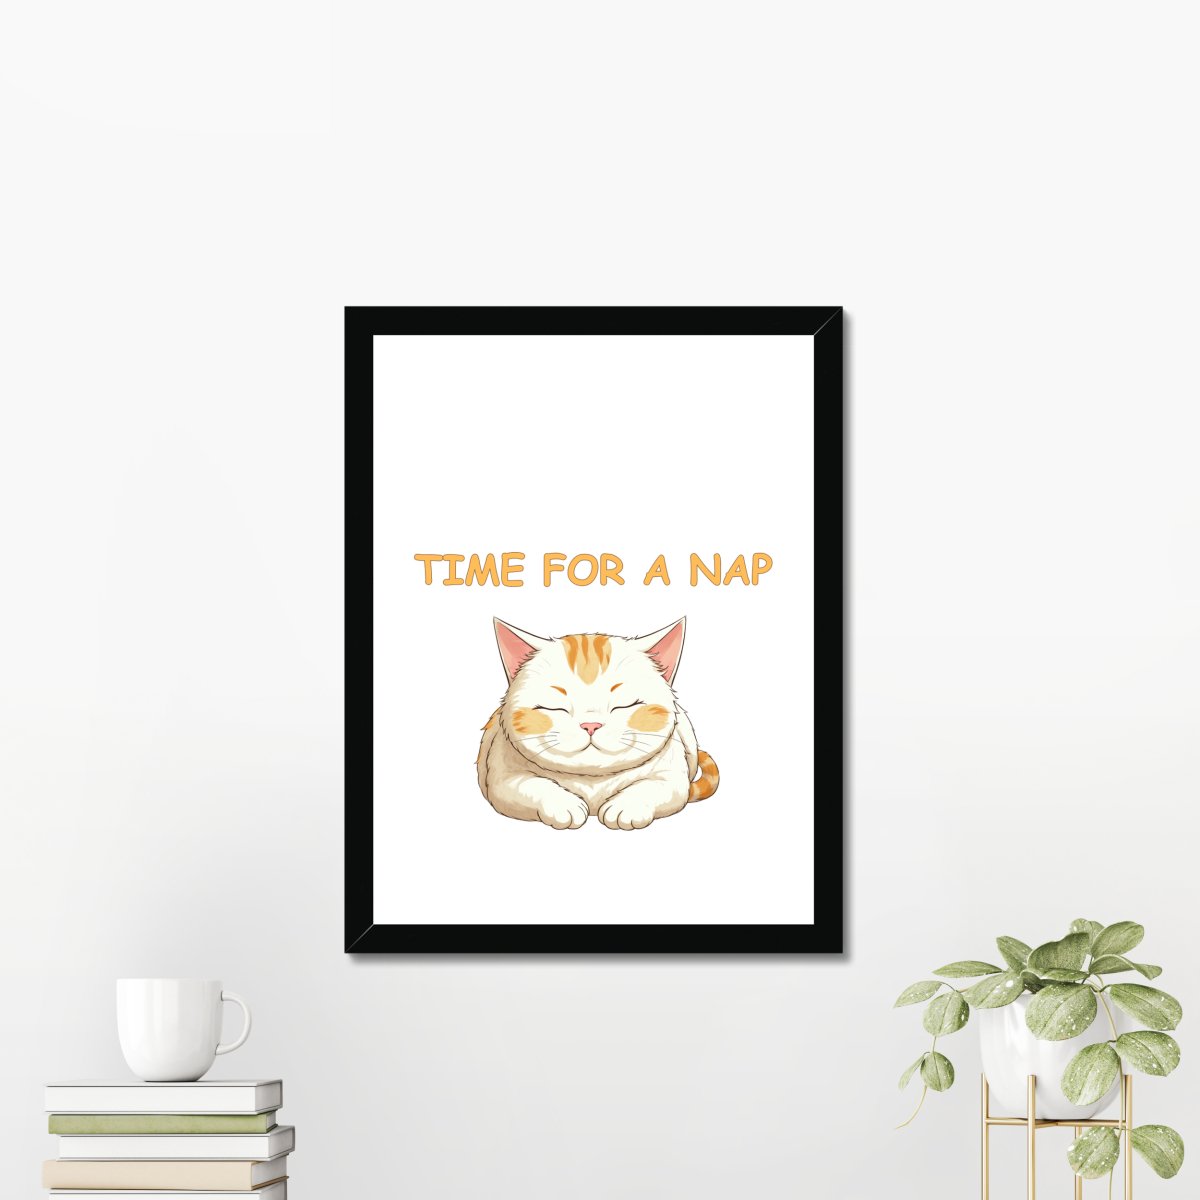 Time for a nap - Art print - Poster - Ever colorful